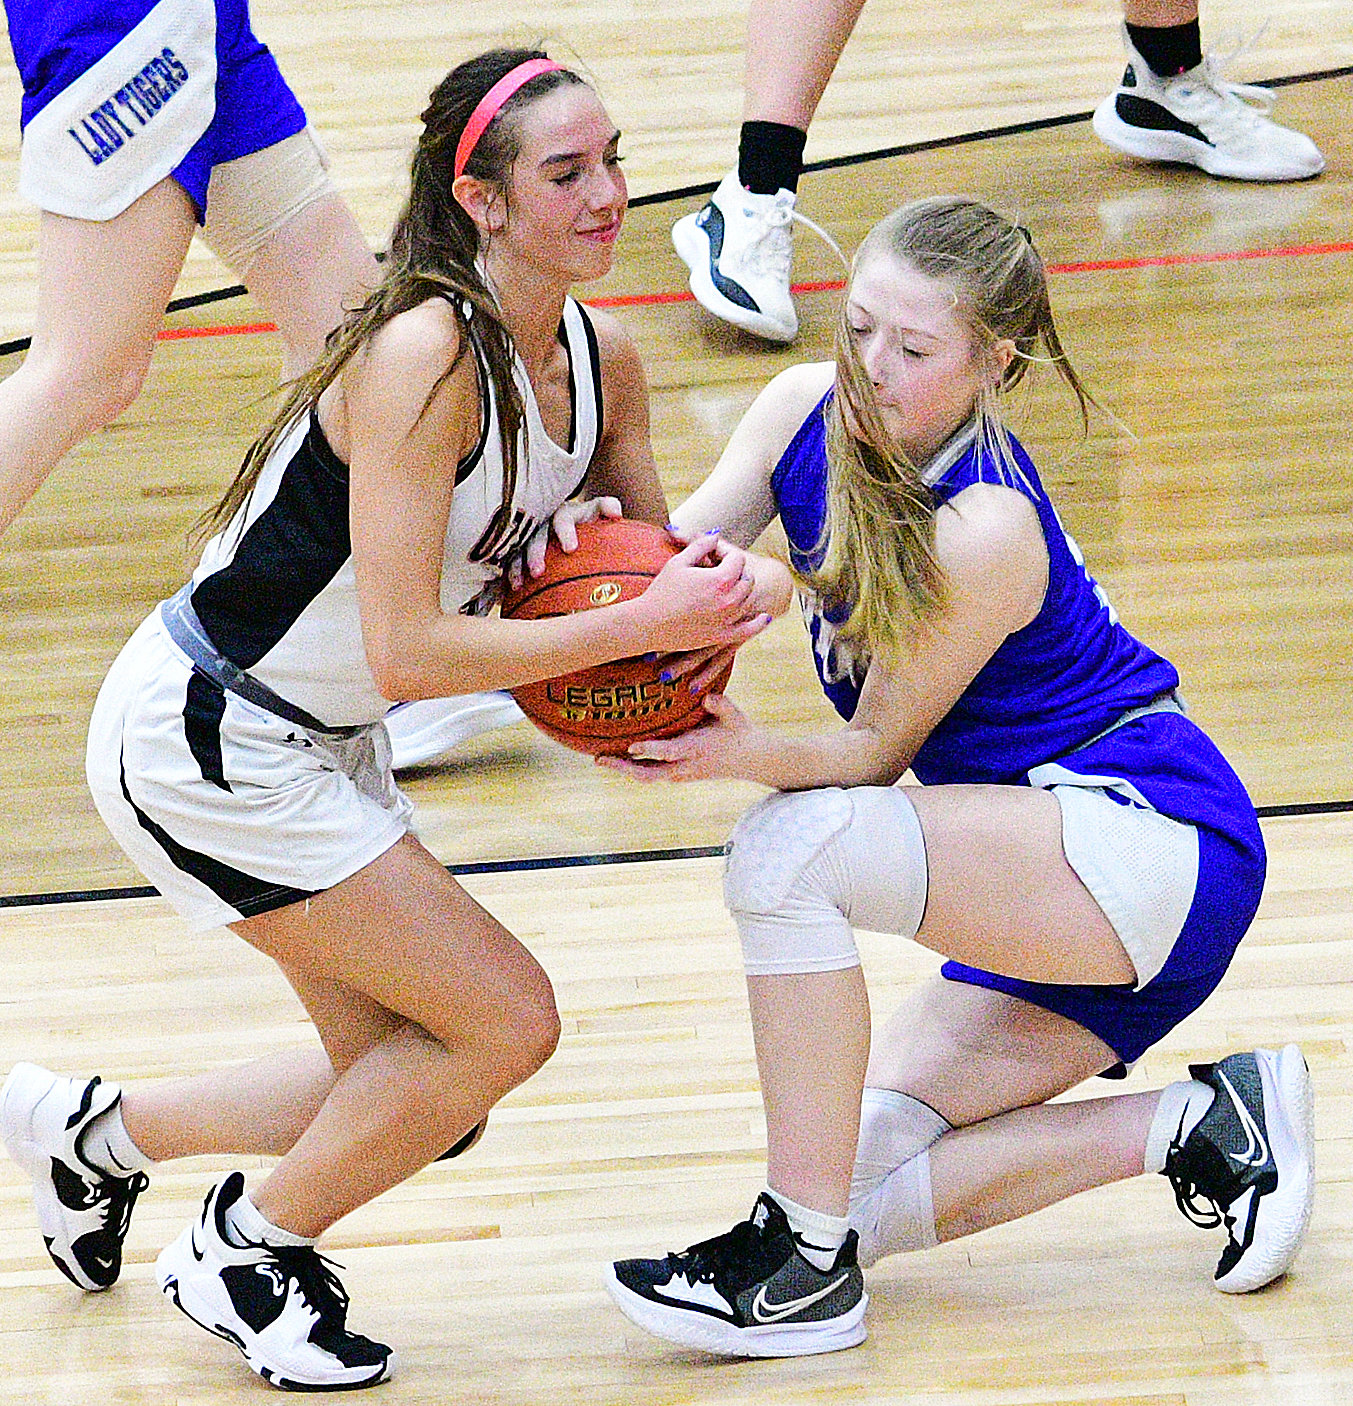 OZARK’S RILEY BOGGS battles a Carthage player for possession of the ball.